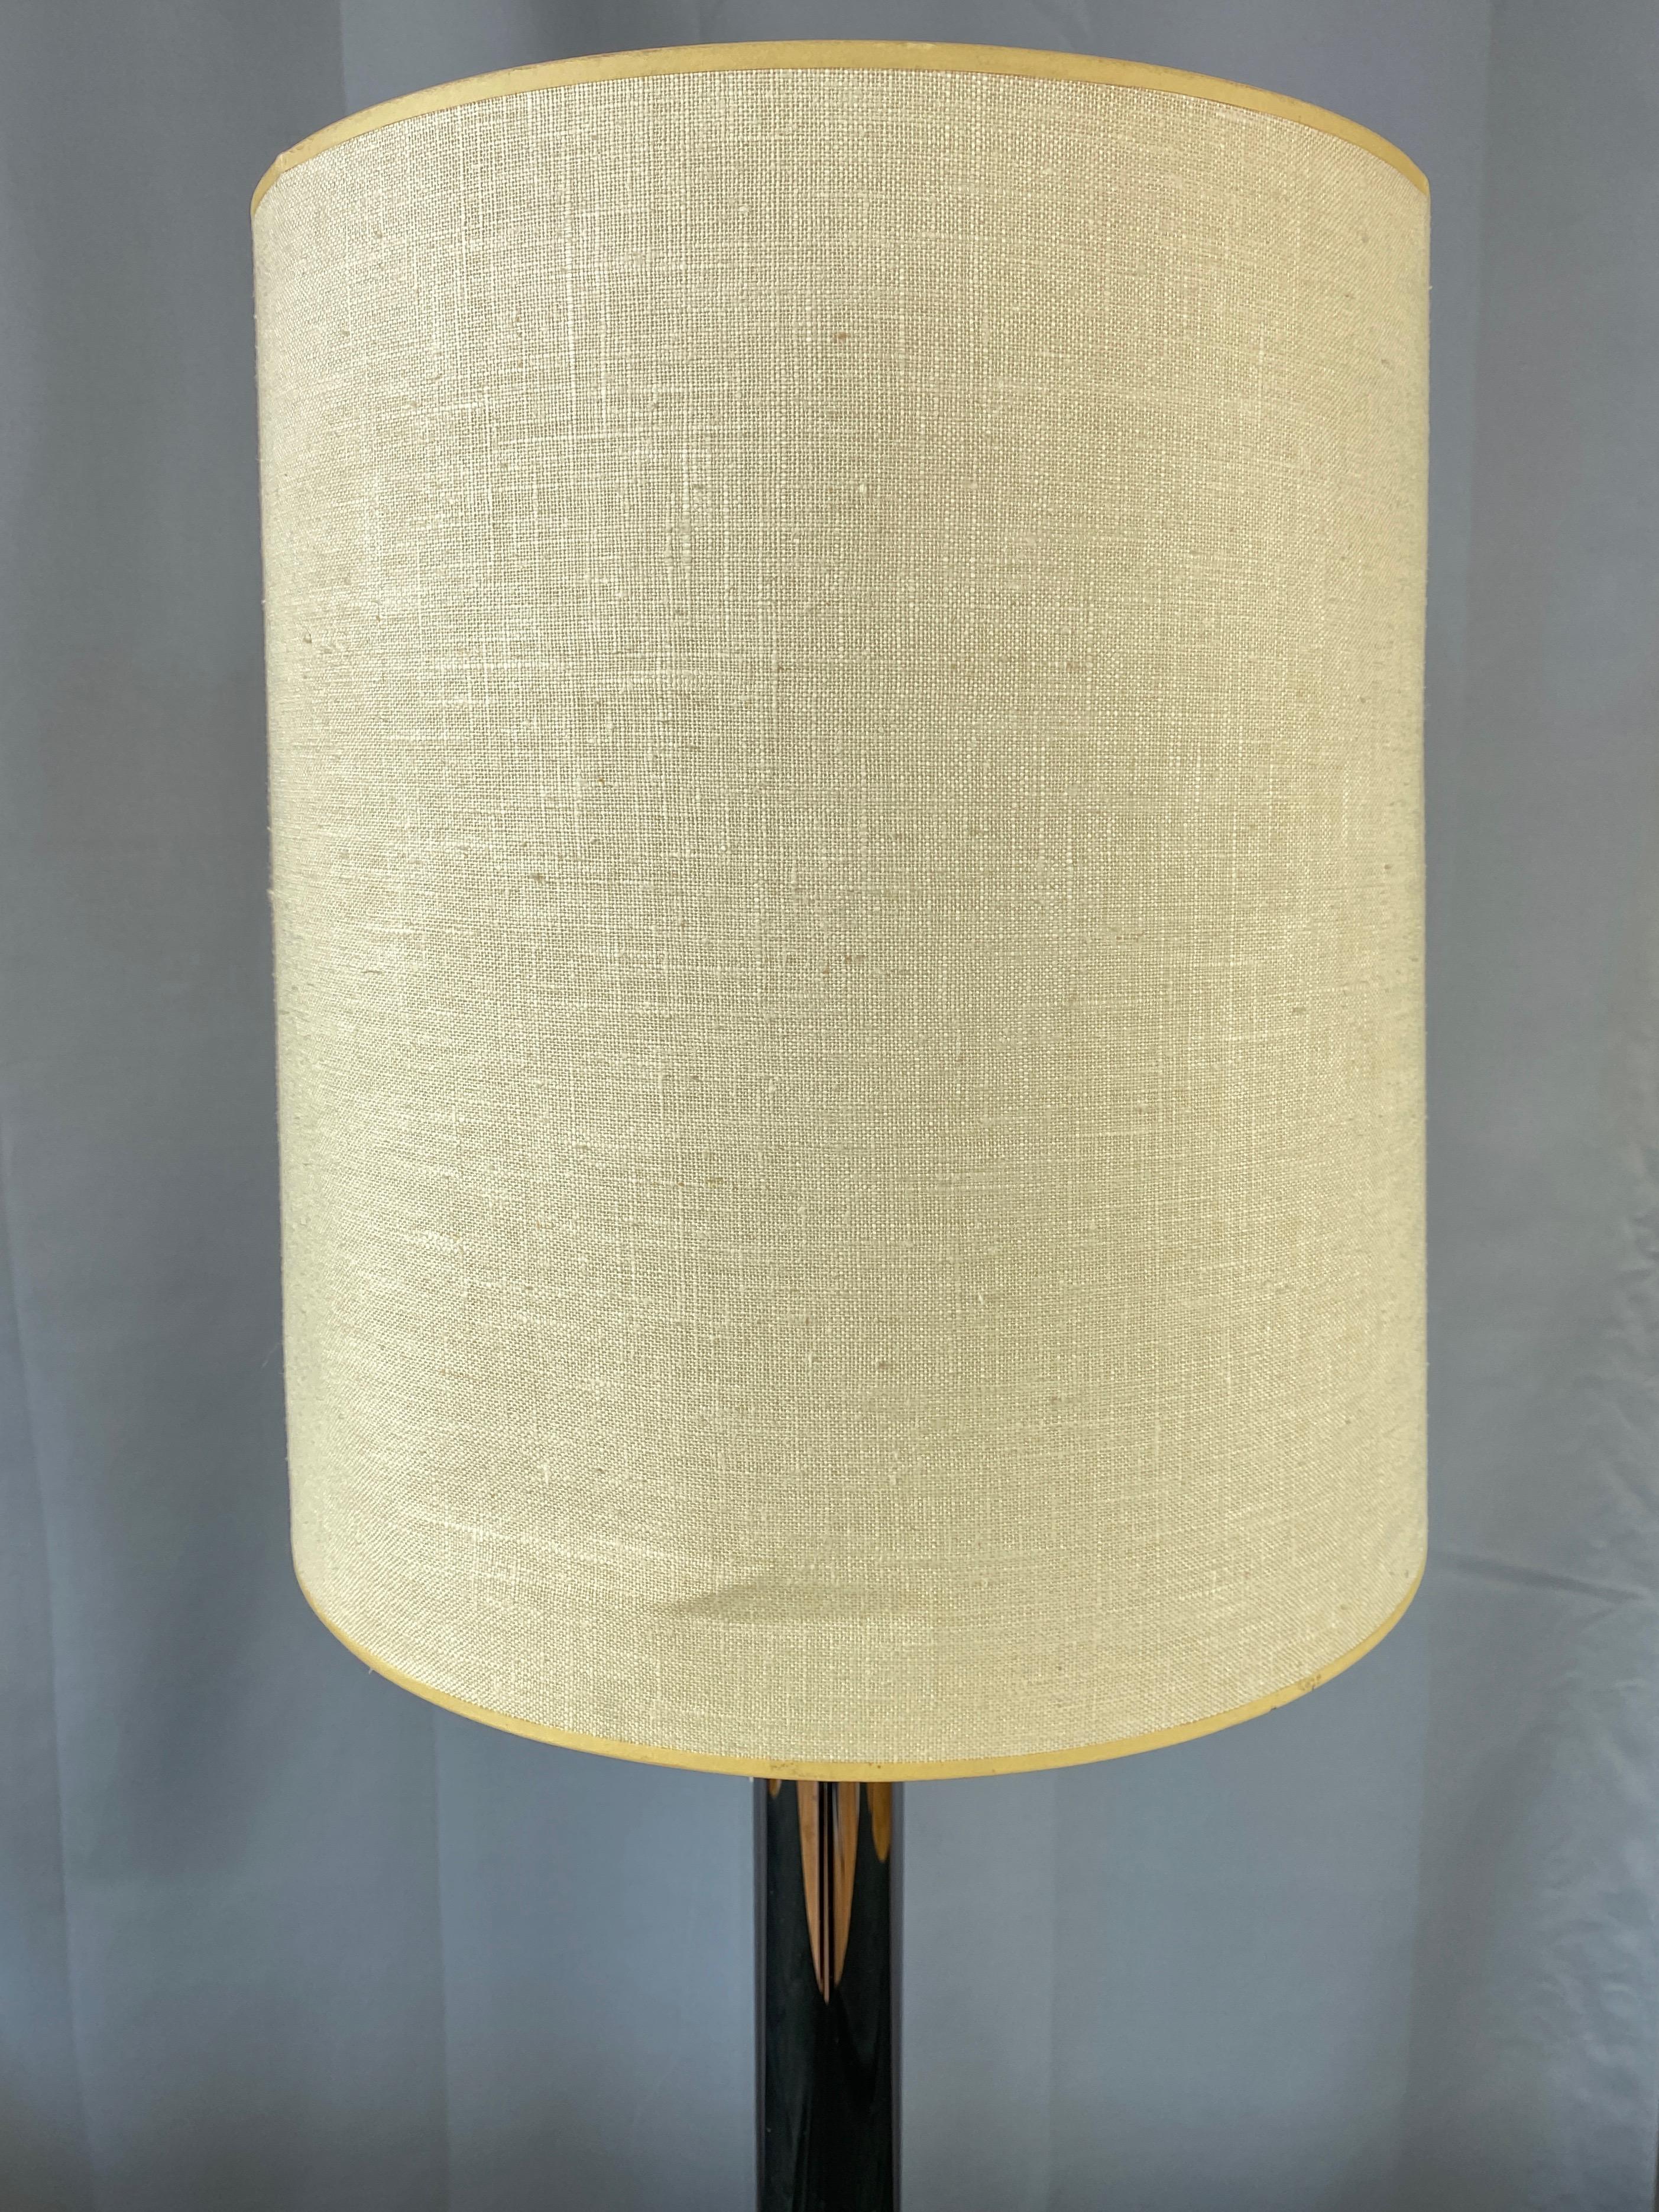 Nessen Tall Minimalist Chrome Table Lamp with Original Shade, c. 1970 For Sale 5